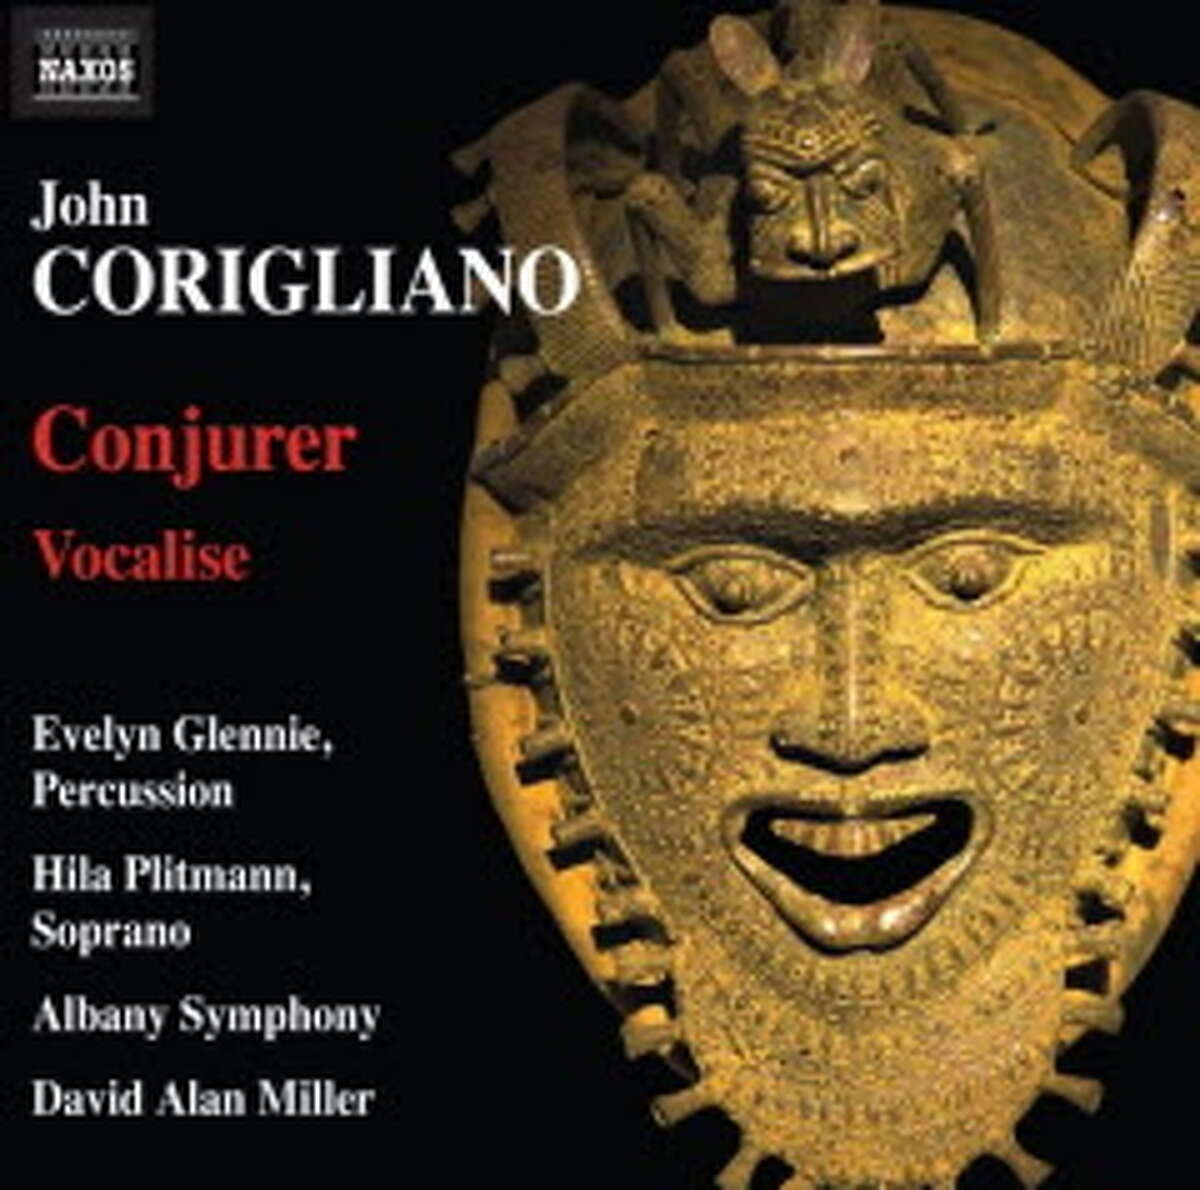 John Corigliano "Conjurer" performed by Albany Symphony Orchestra ORG XMIT: MER2013102217195486